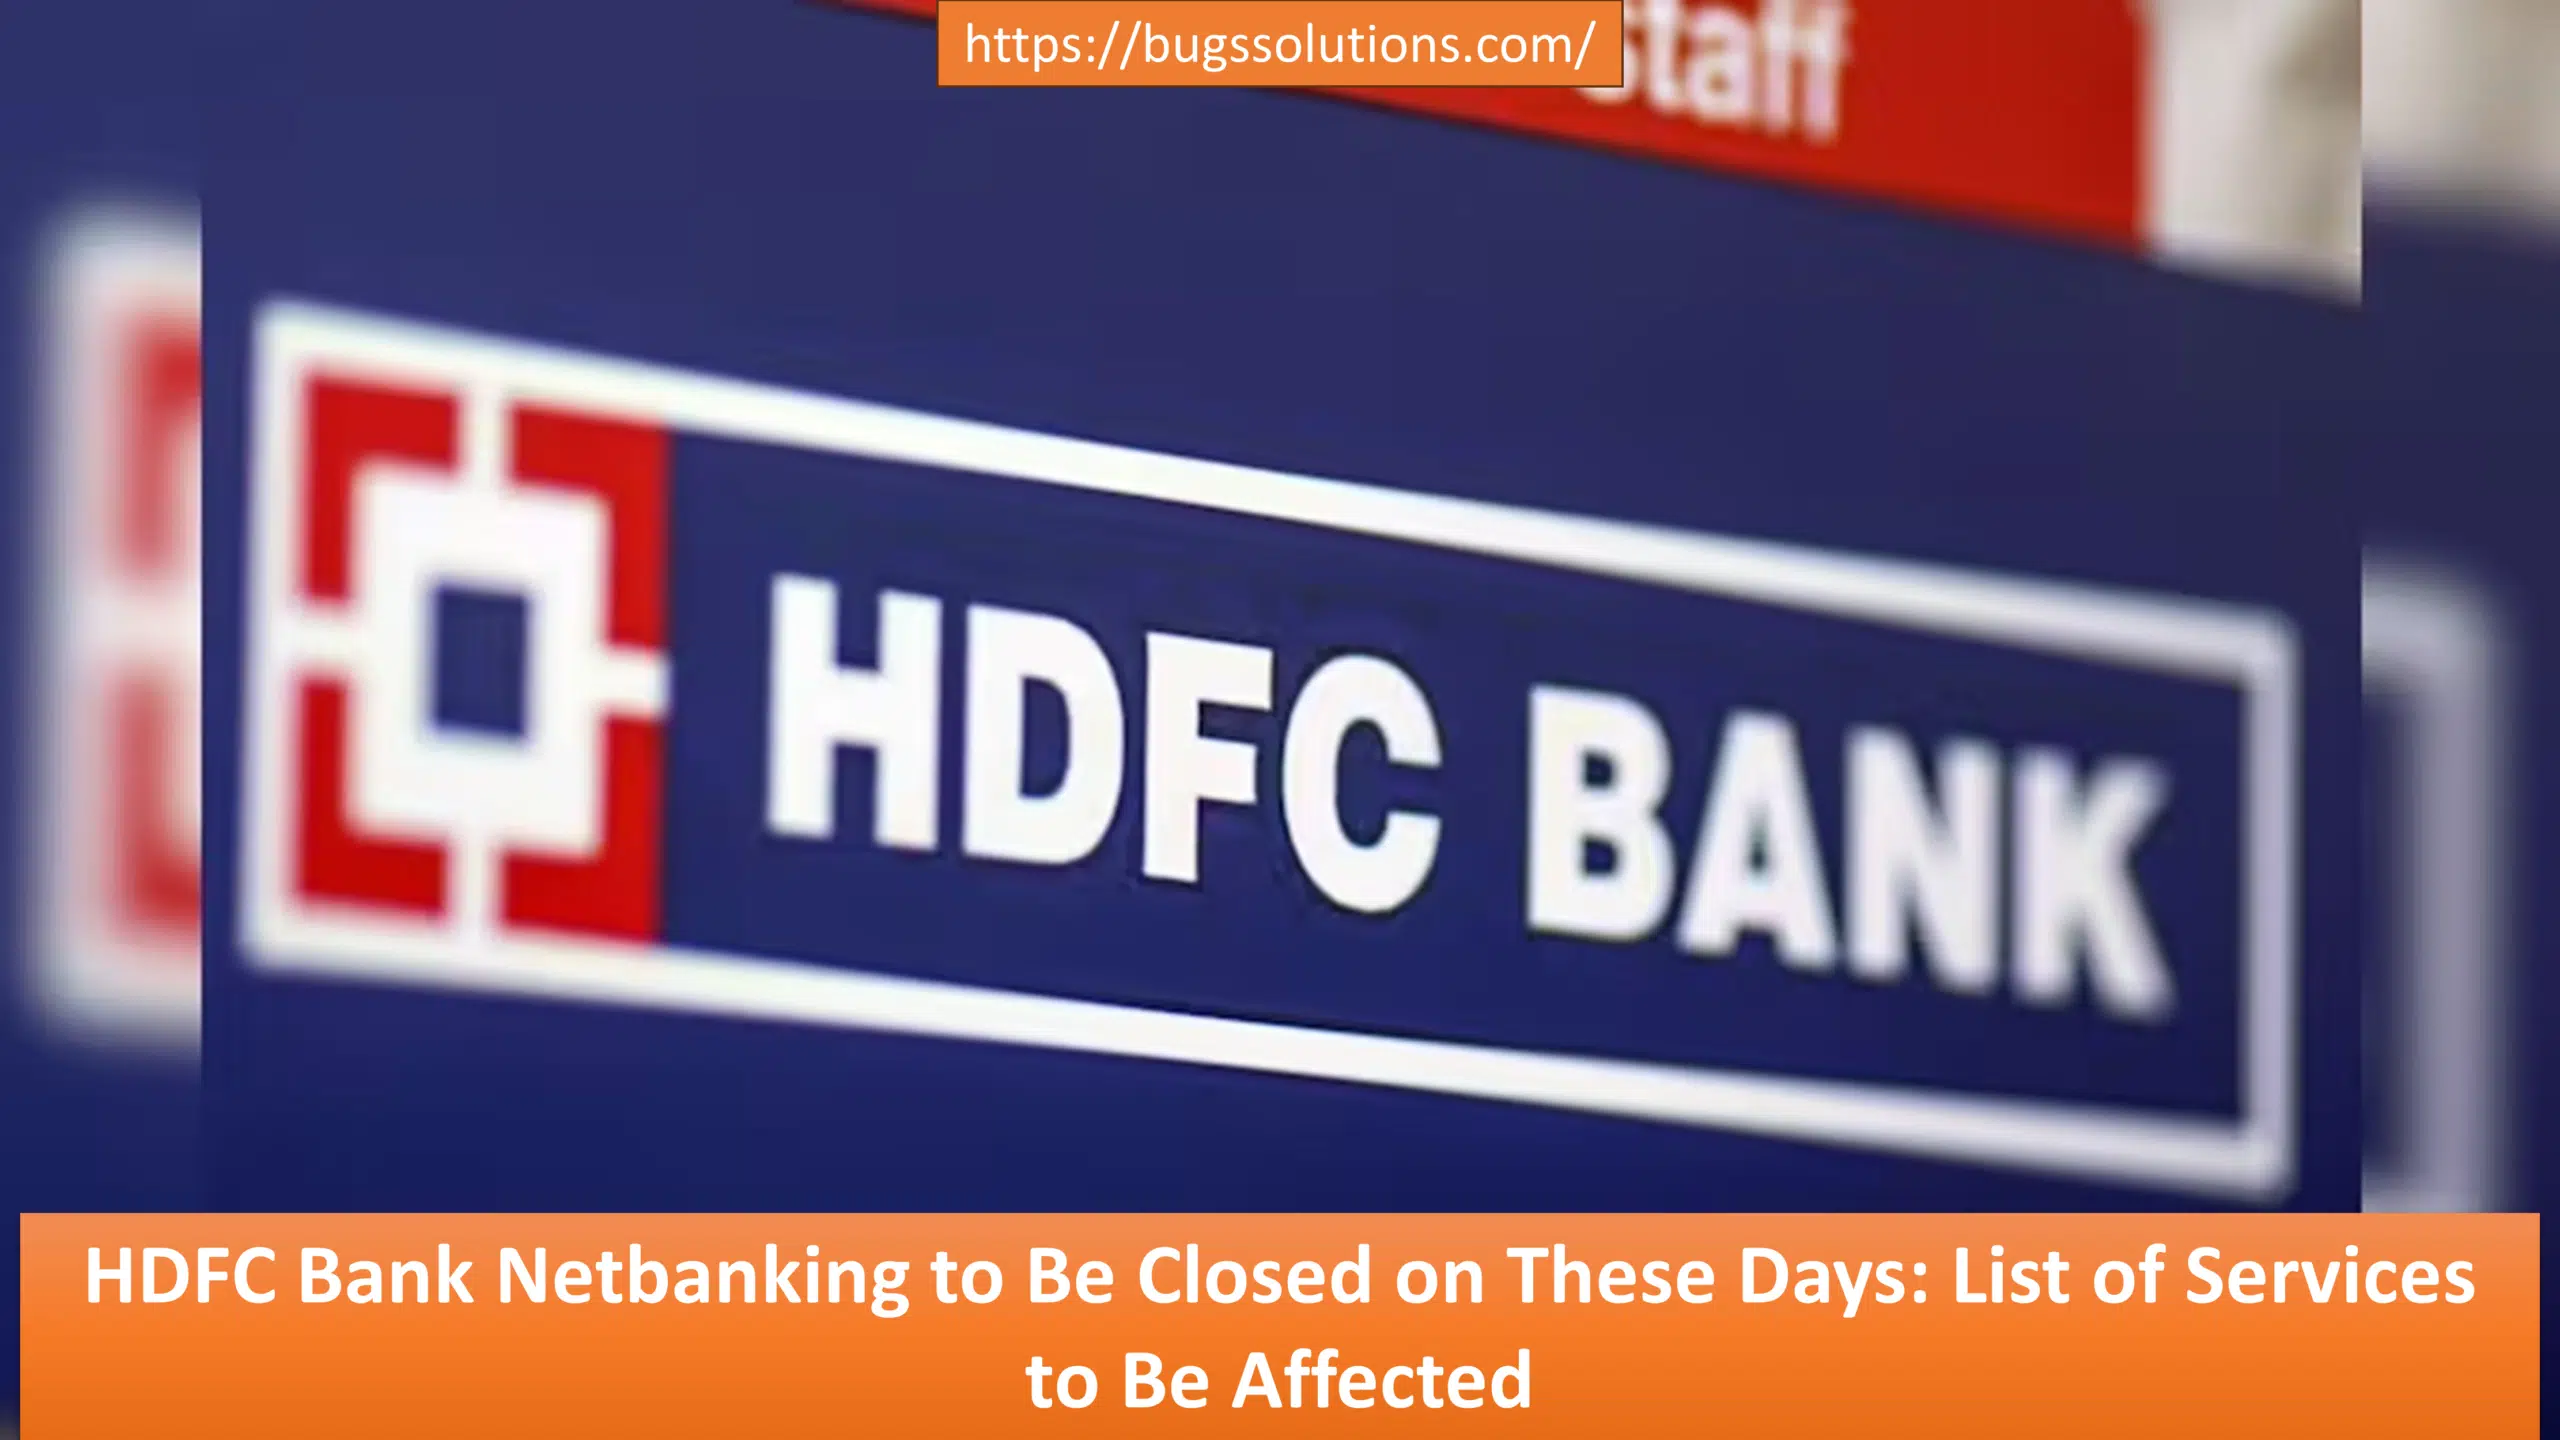 HDFC Bank Netbanking to Be Closed on These Days: List of Services to Be Affected